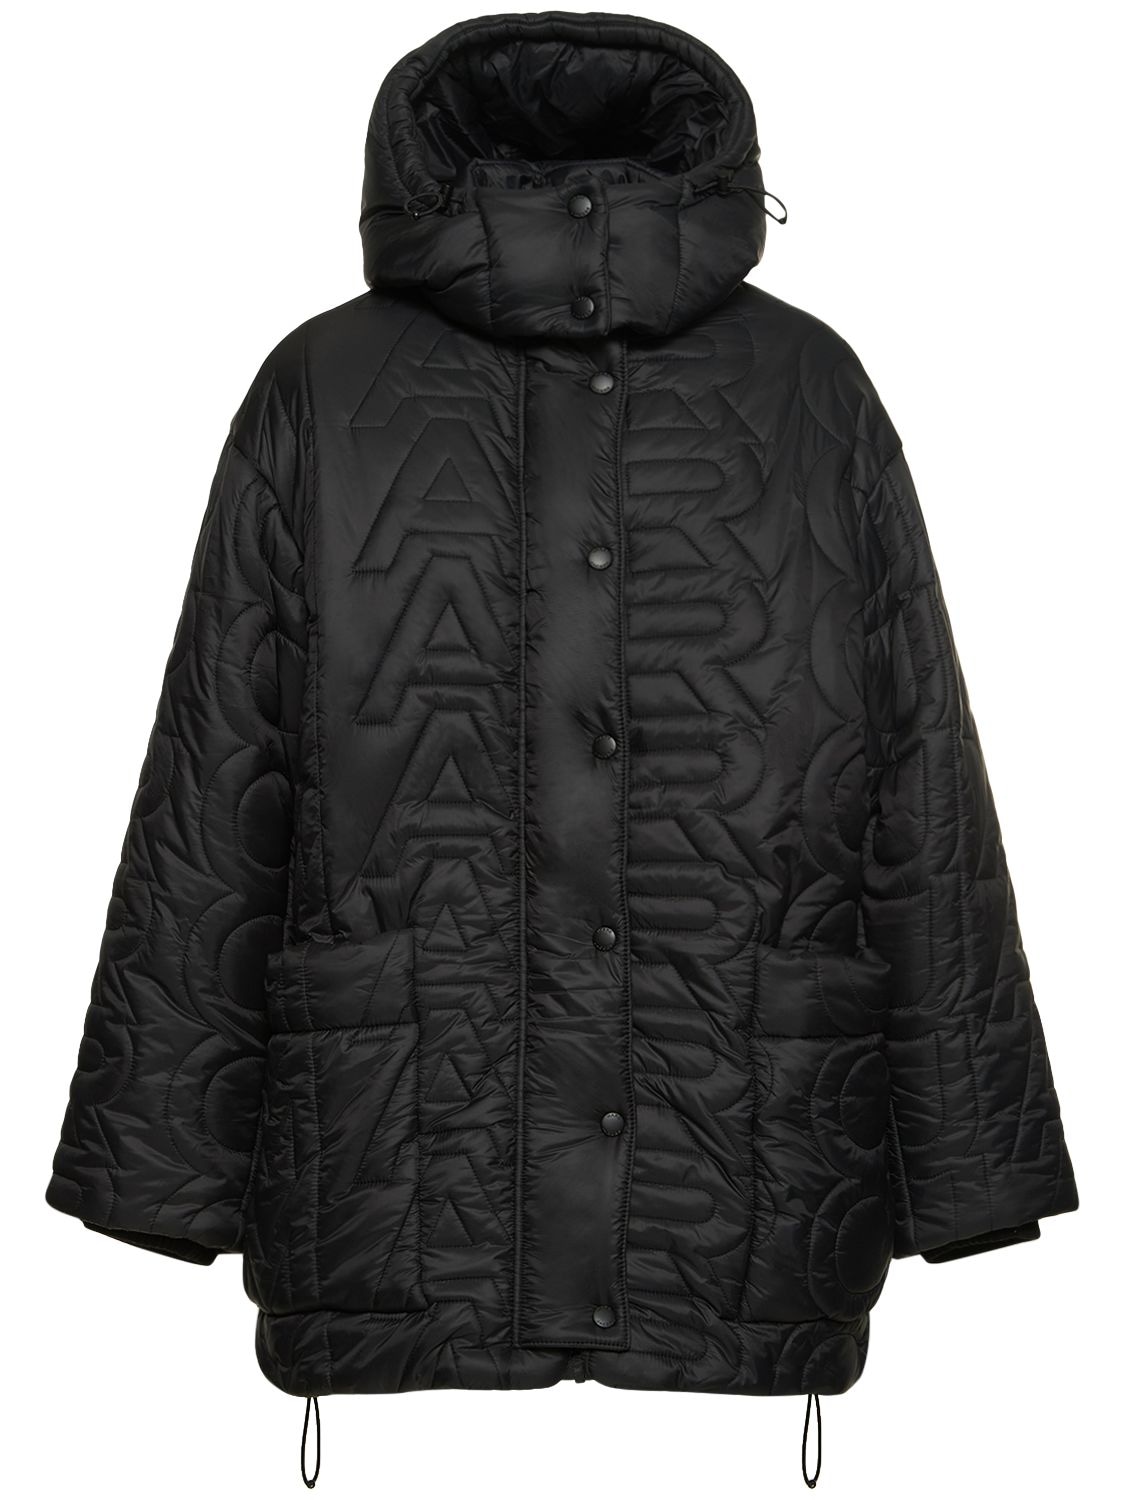 Monogram Quilted Down Jacket - MARC JACOBS - Modalova